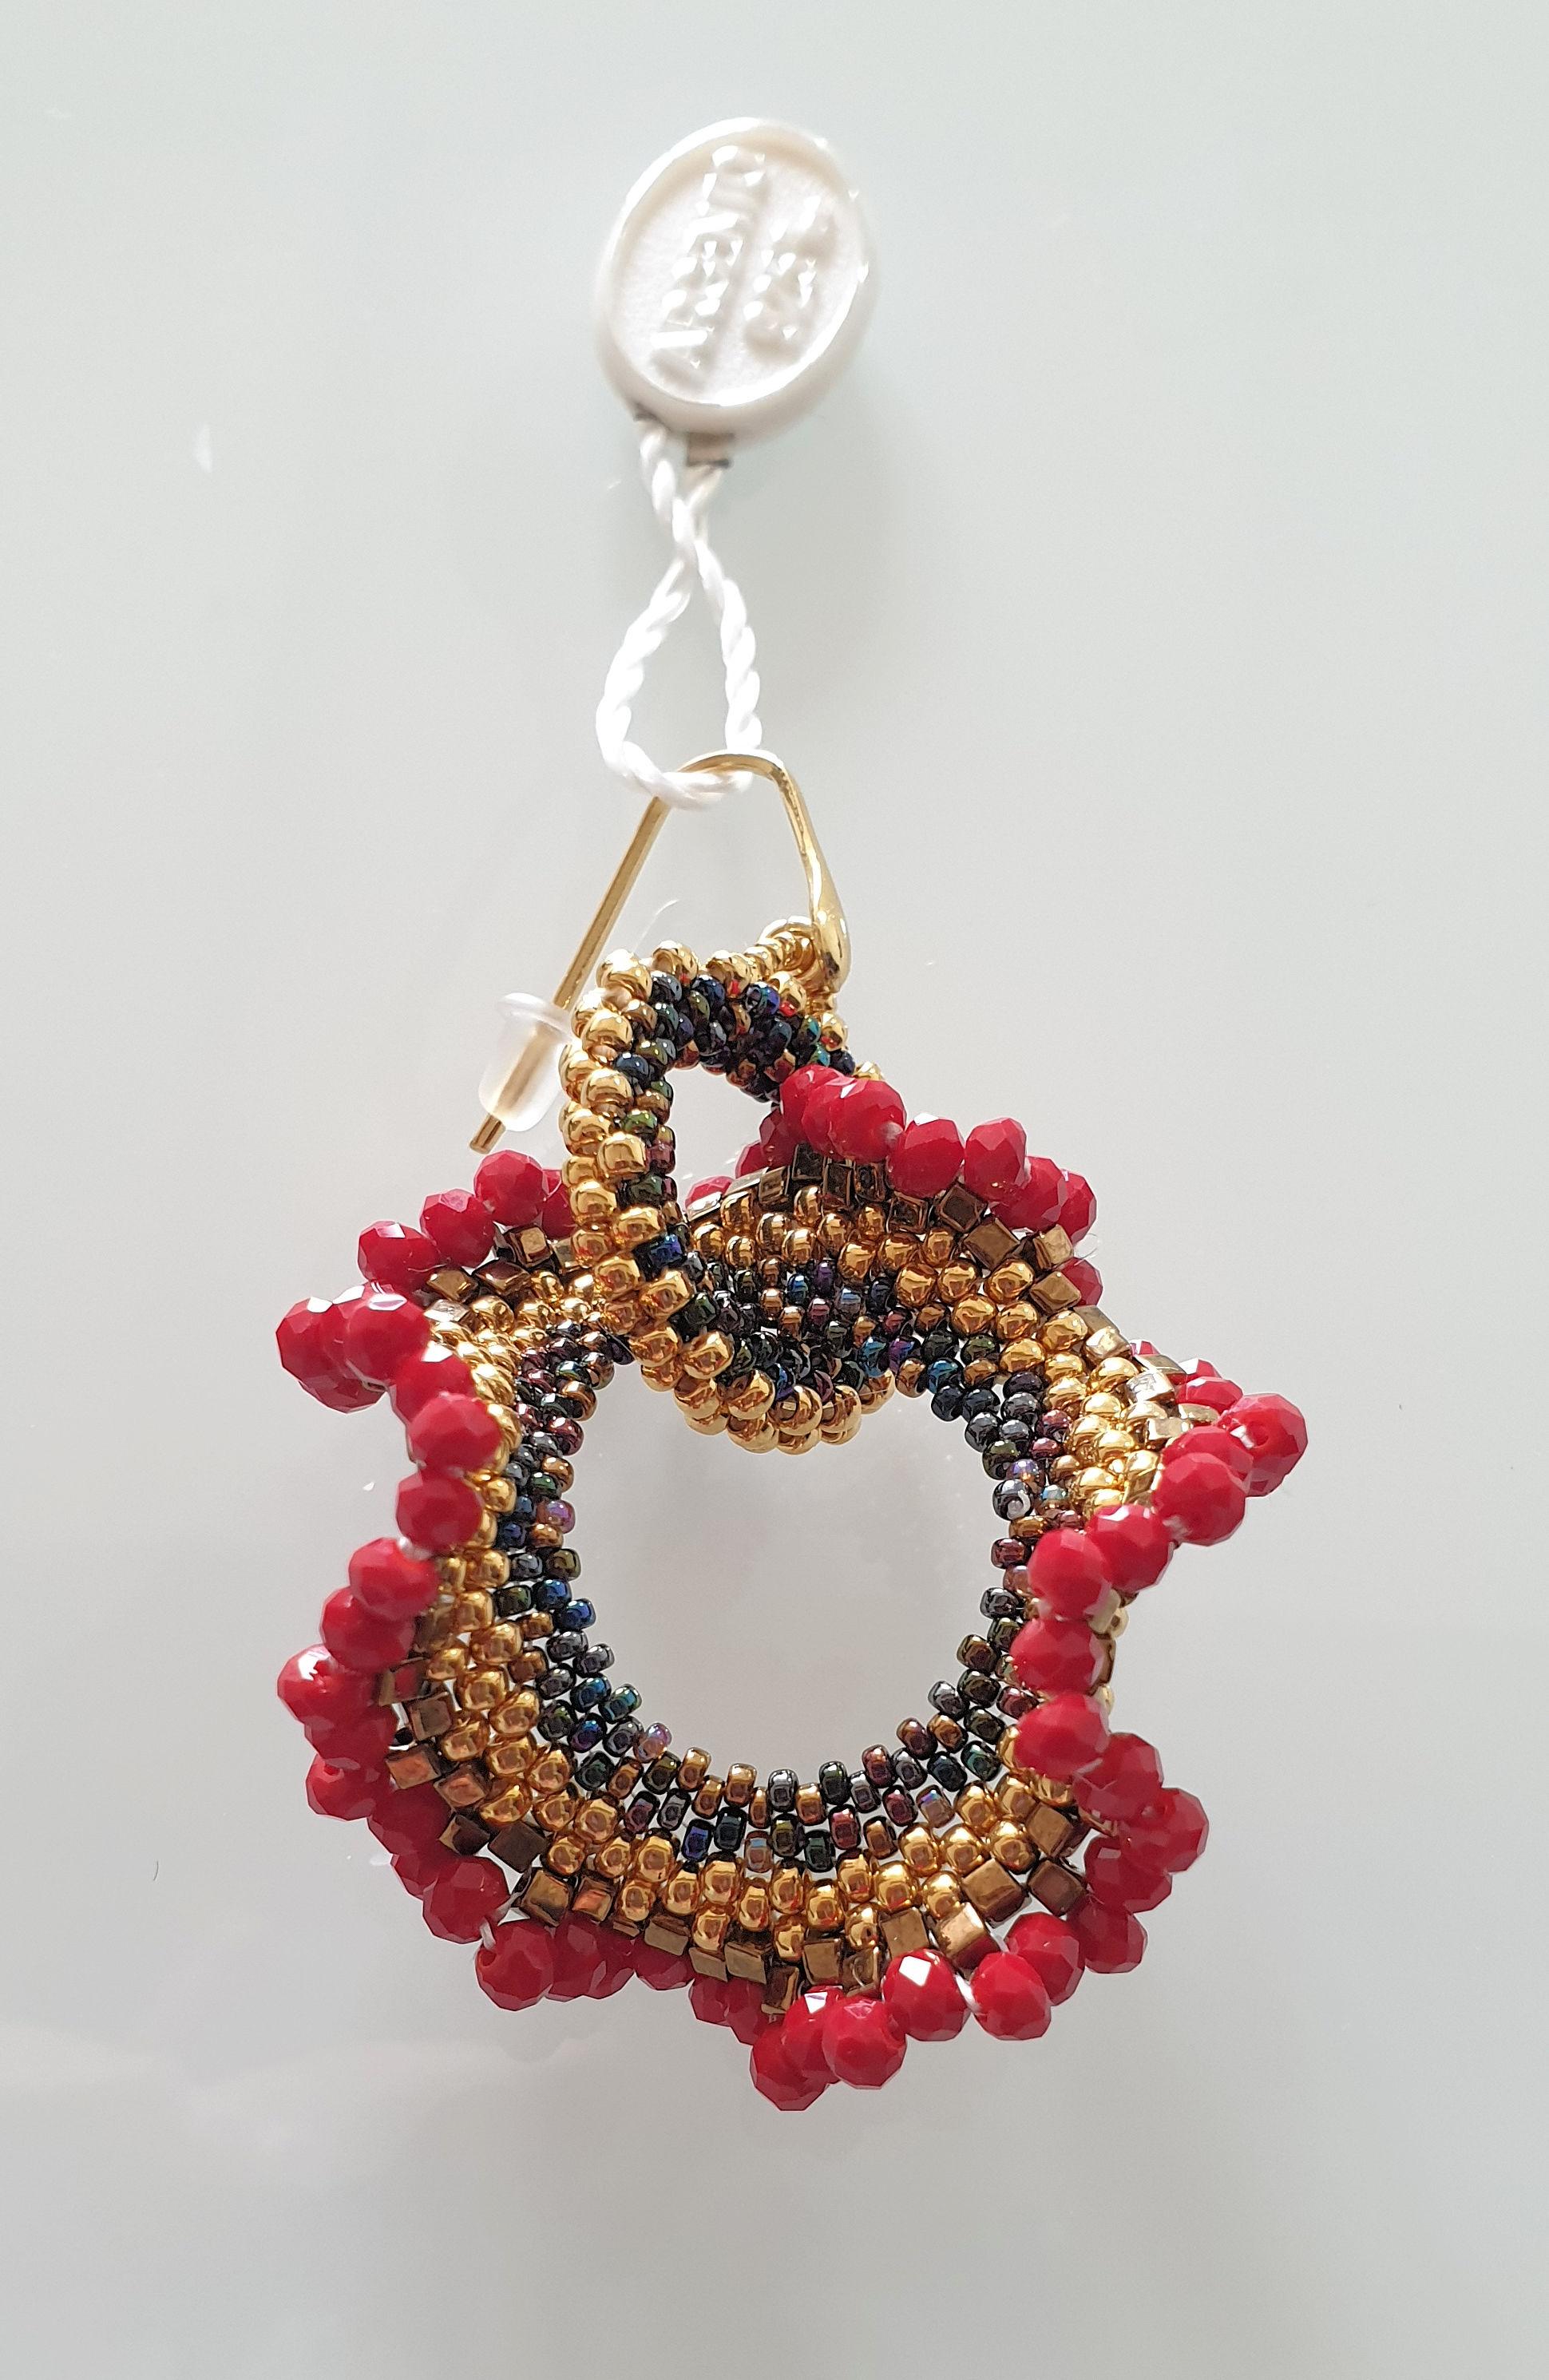 Artist Pair drop earrings hand made in red & gold Murano glass beads by artist Paola B.